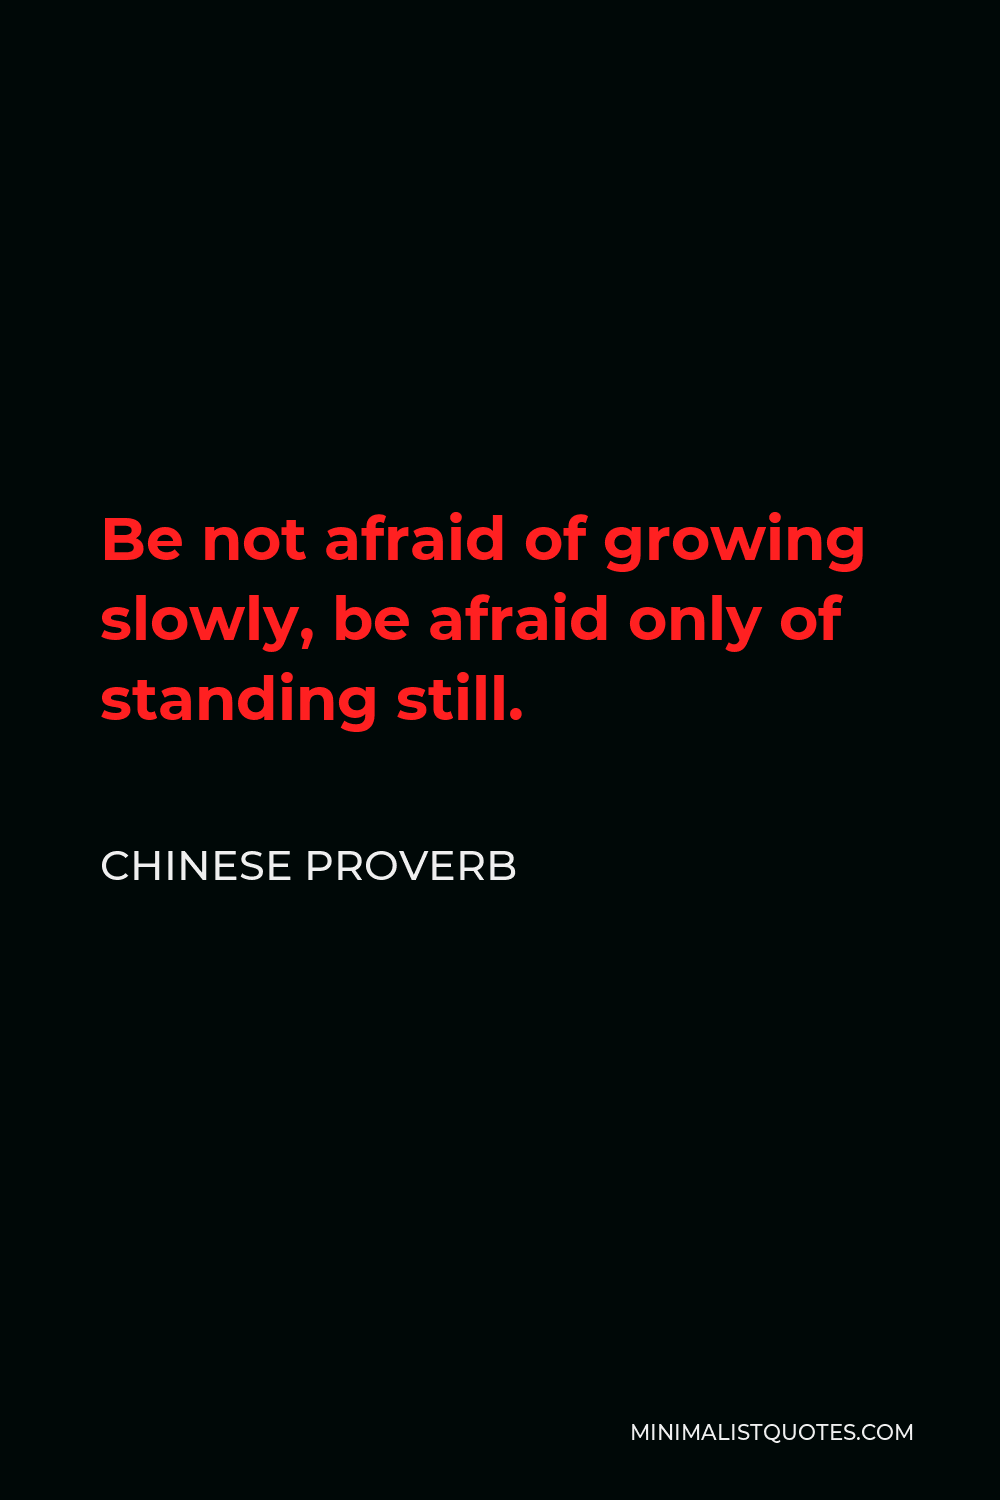 Chinese Proverb Quote - Be not afraid of growing slowly, be afraid only of standing still.